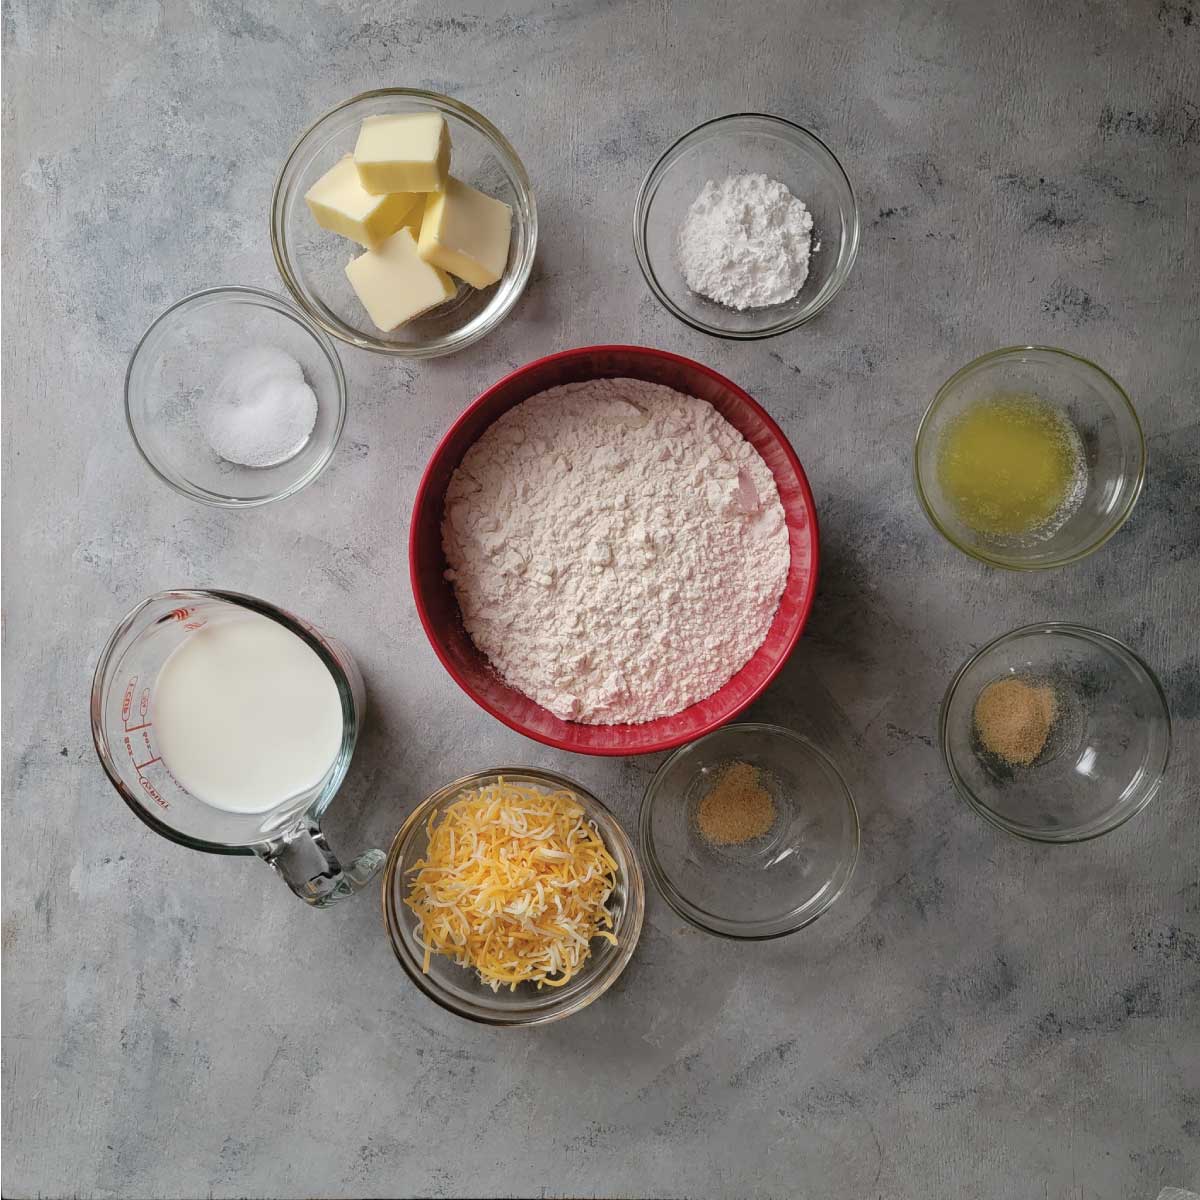 Ingredients prepped - shredded cheese, milk, salt, butter, baking powder, melted butter, garlic powder divided in 2 bowls and flour.